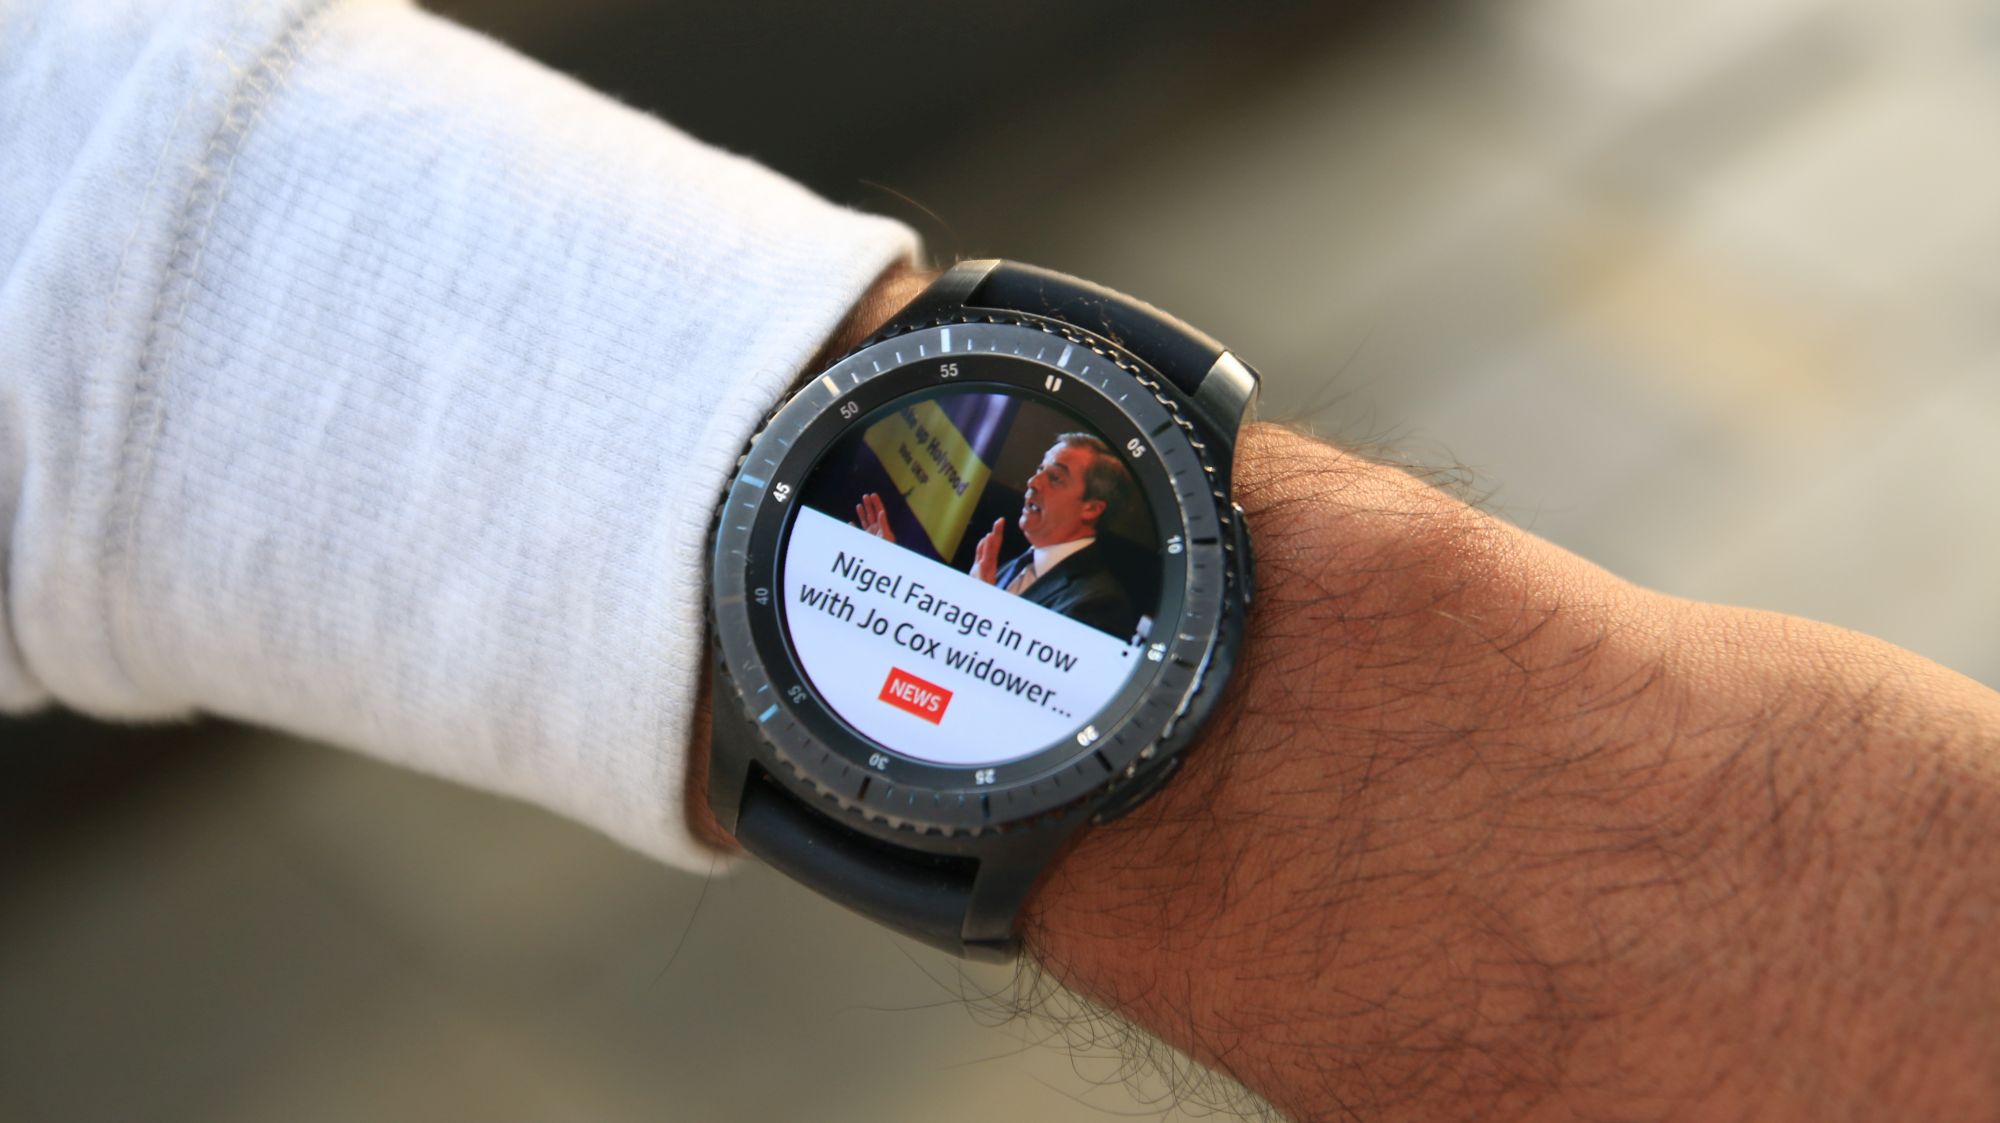 samsung gear s3 iphone compatibility 2019